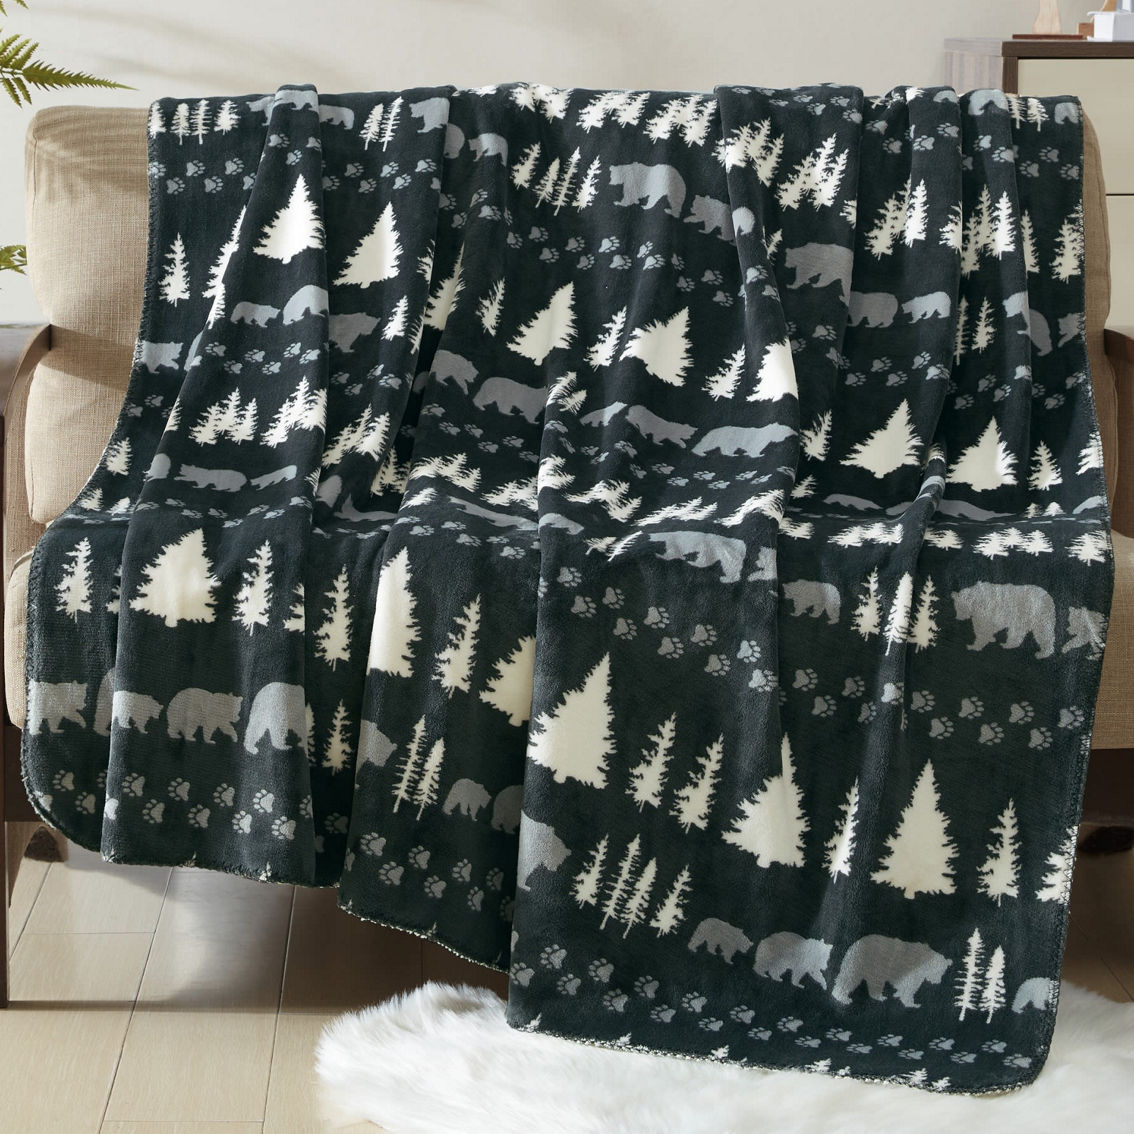 Colemand Reversible Printed Plush and Faux Fur Throw Blanket - 60 in. x 80 in. - Image 2 of 4